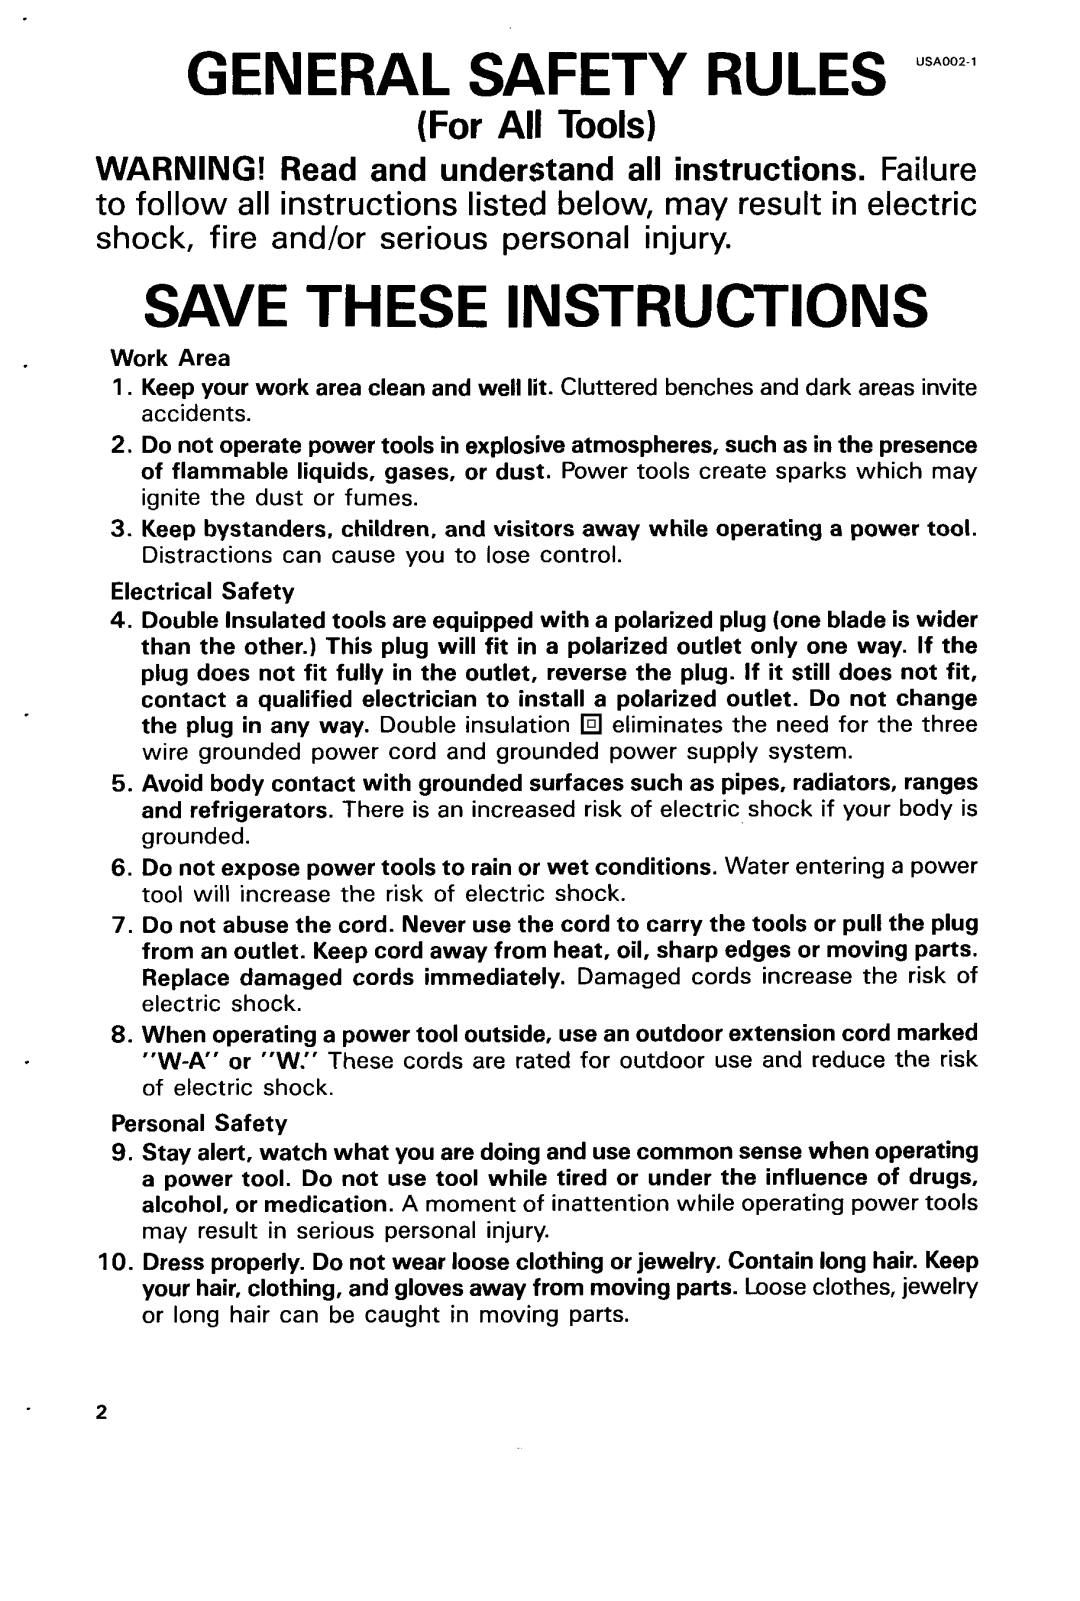 Makita WLAR-L11-L instruction manual GENERAL SAFETY RULES USA002-1, Save These Instructions, For All Tools 